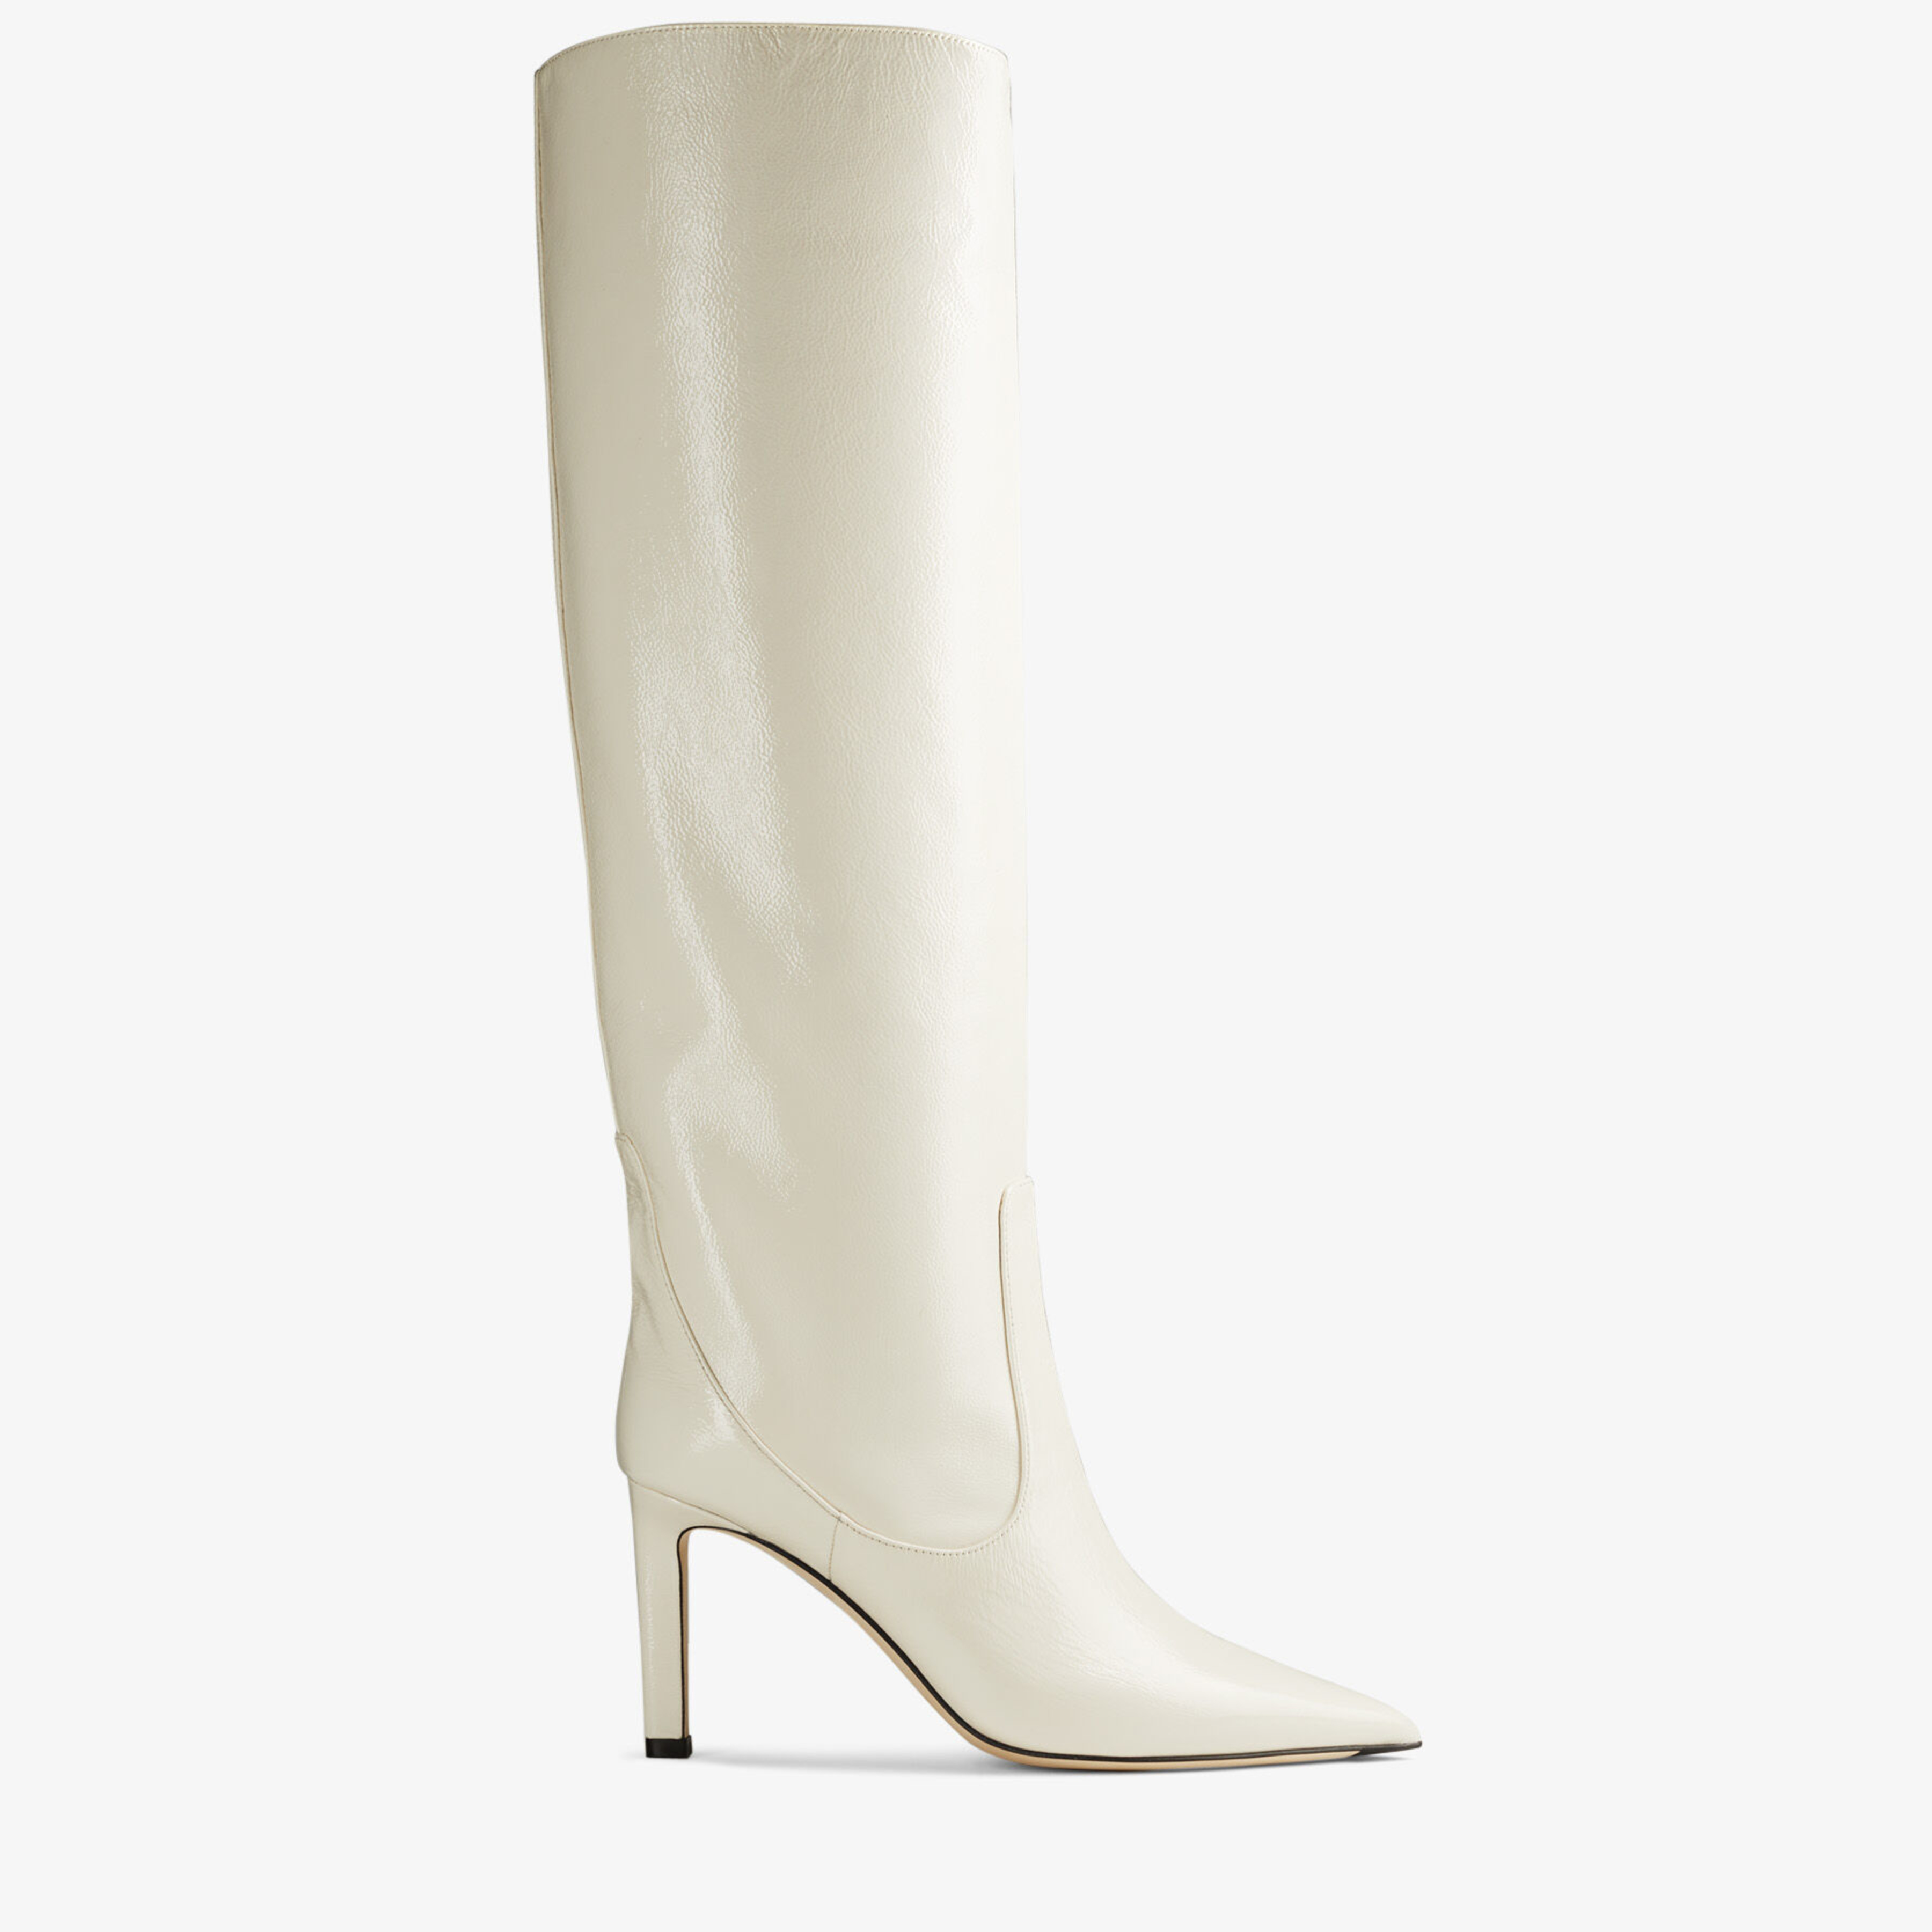 Jimmy Choo - Latte Naplack Pointed Toe Knee-High Boots